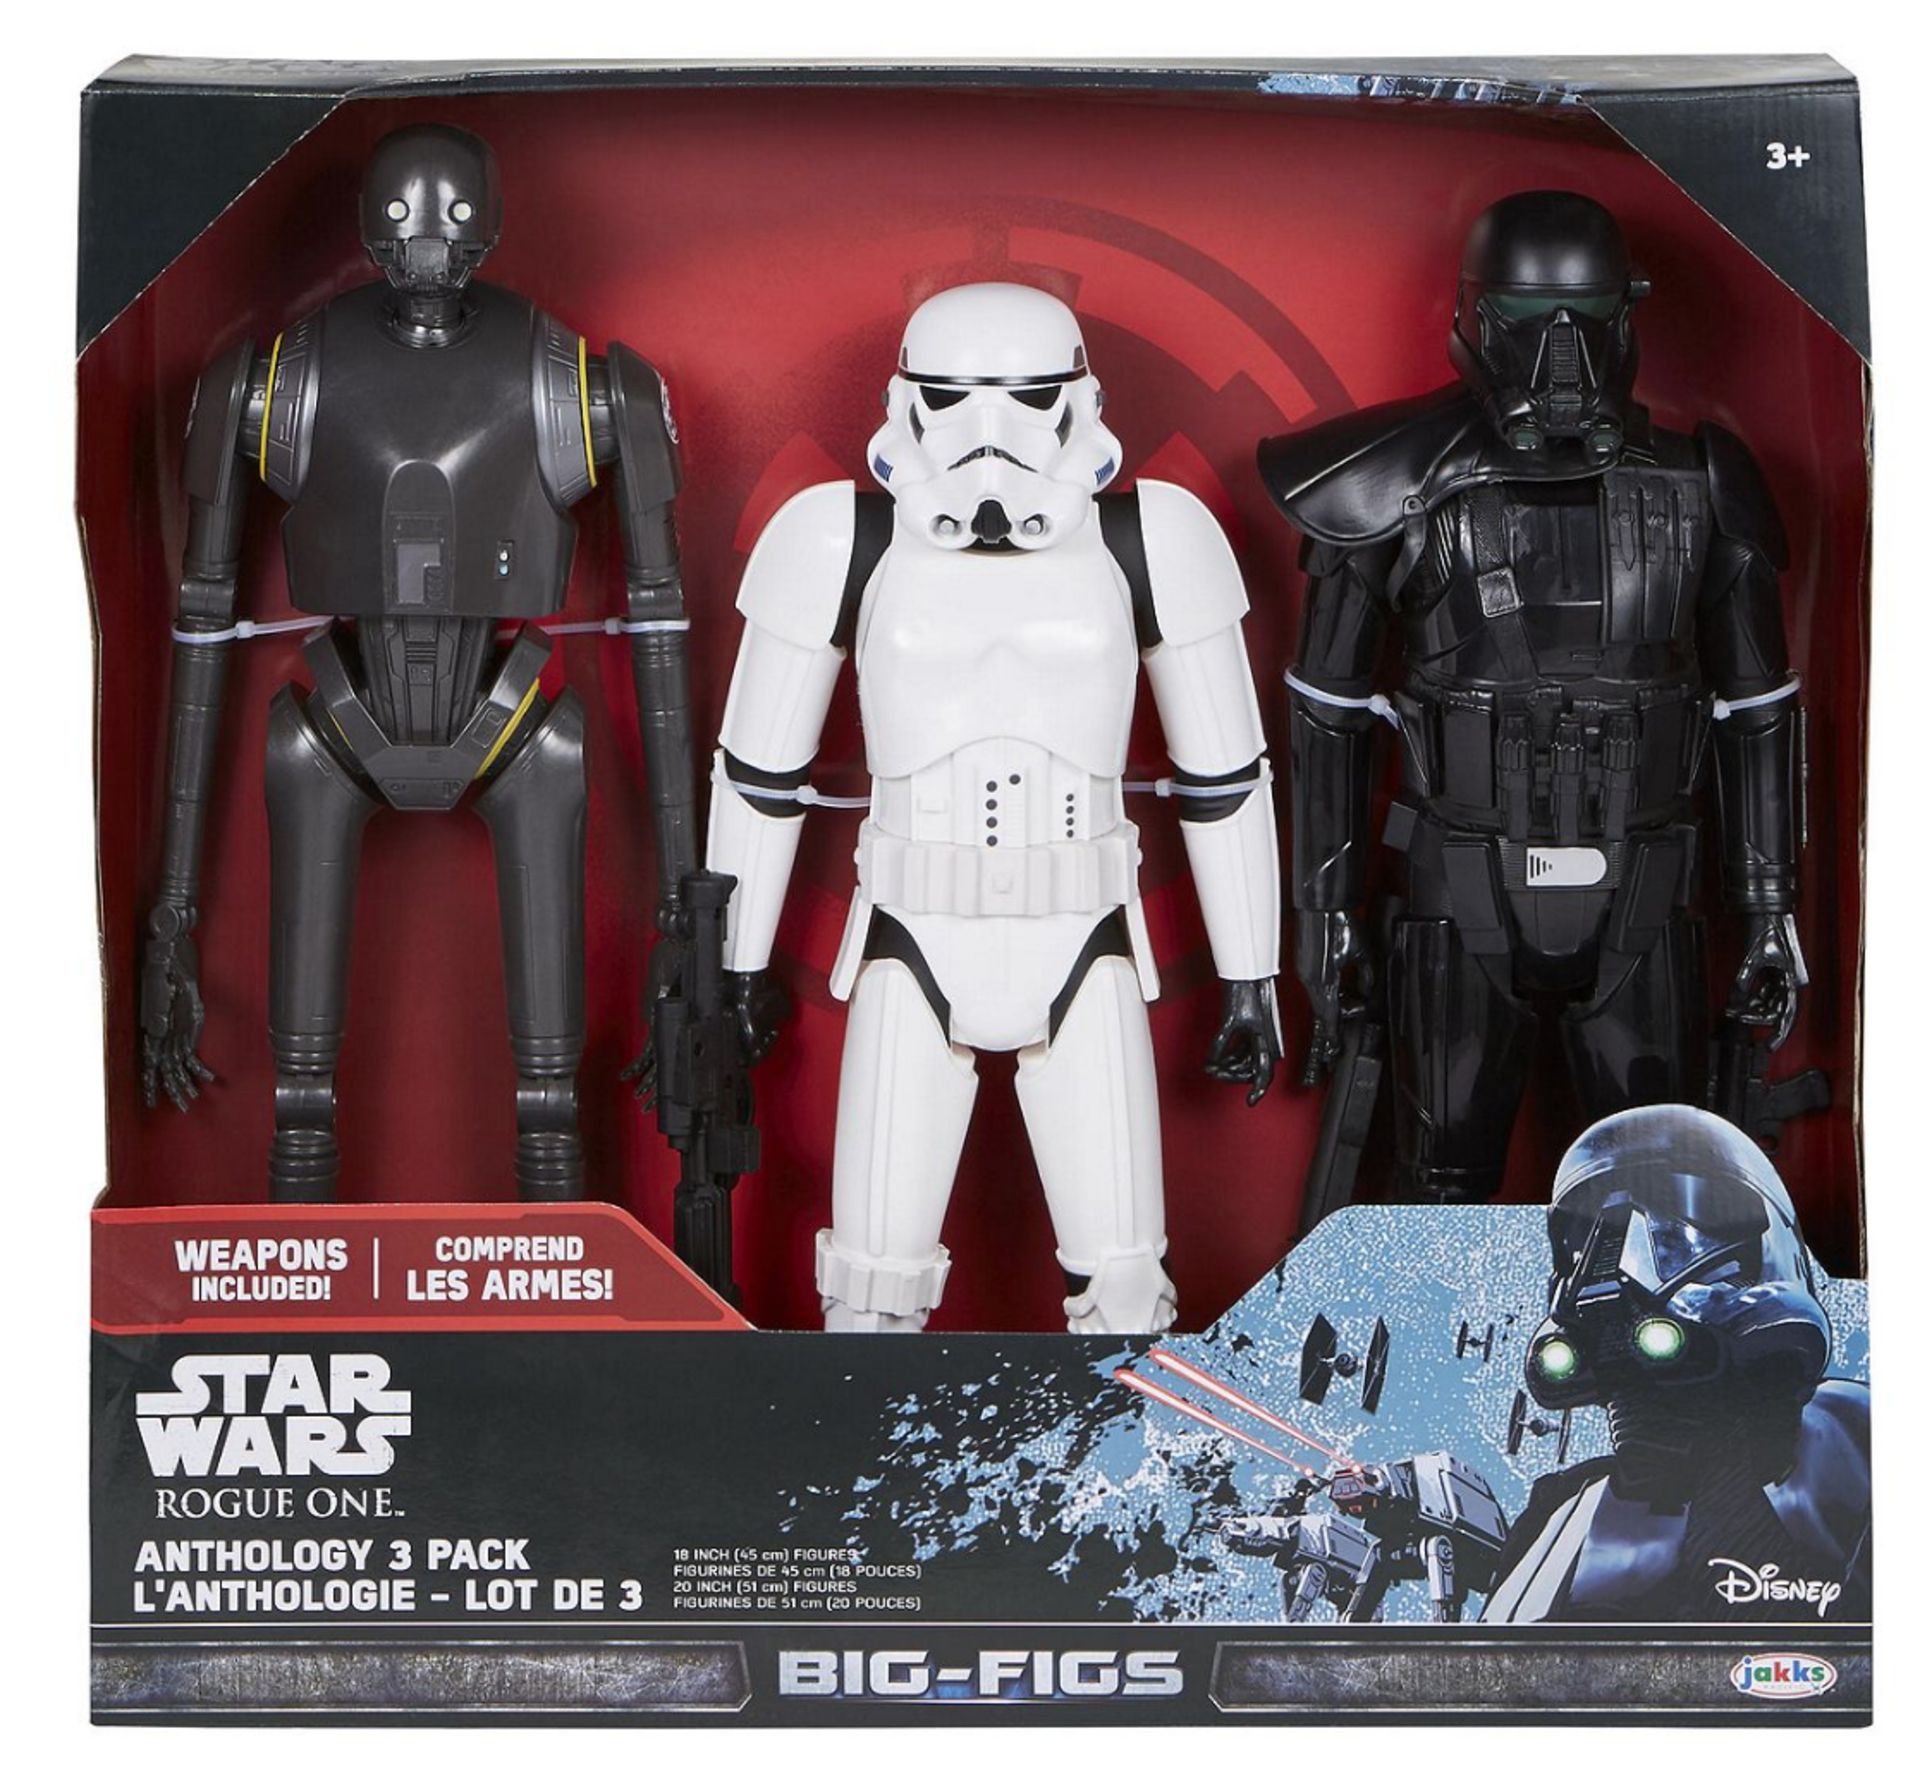 + VAT Brand New Big Star Wars Rogue One Action Figure (18-20" Tall) Anthology 3 Pack - ISP £39.49 (